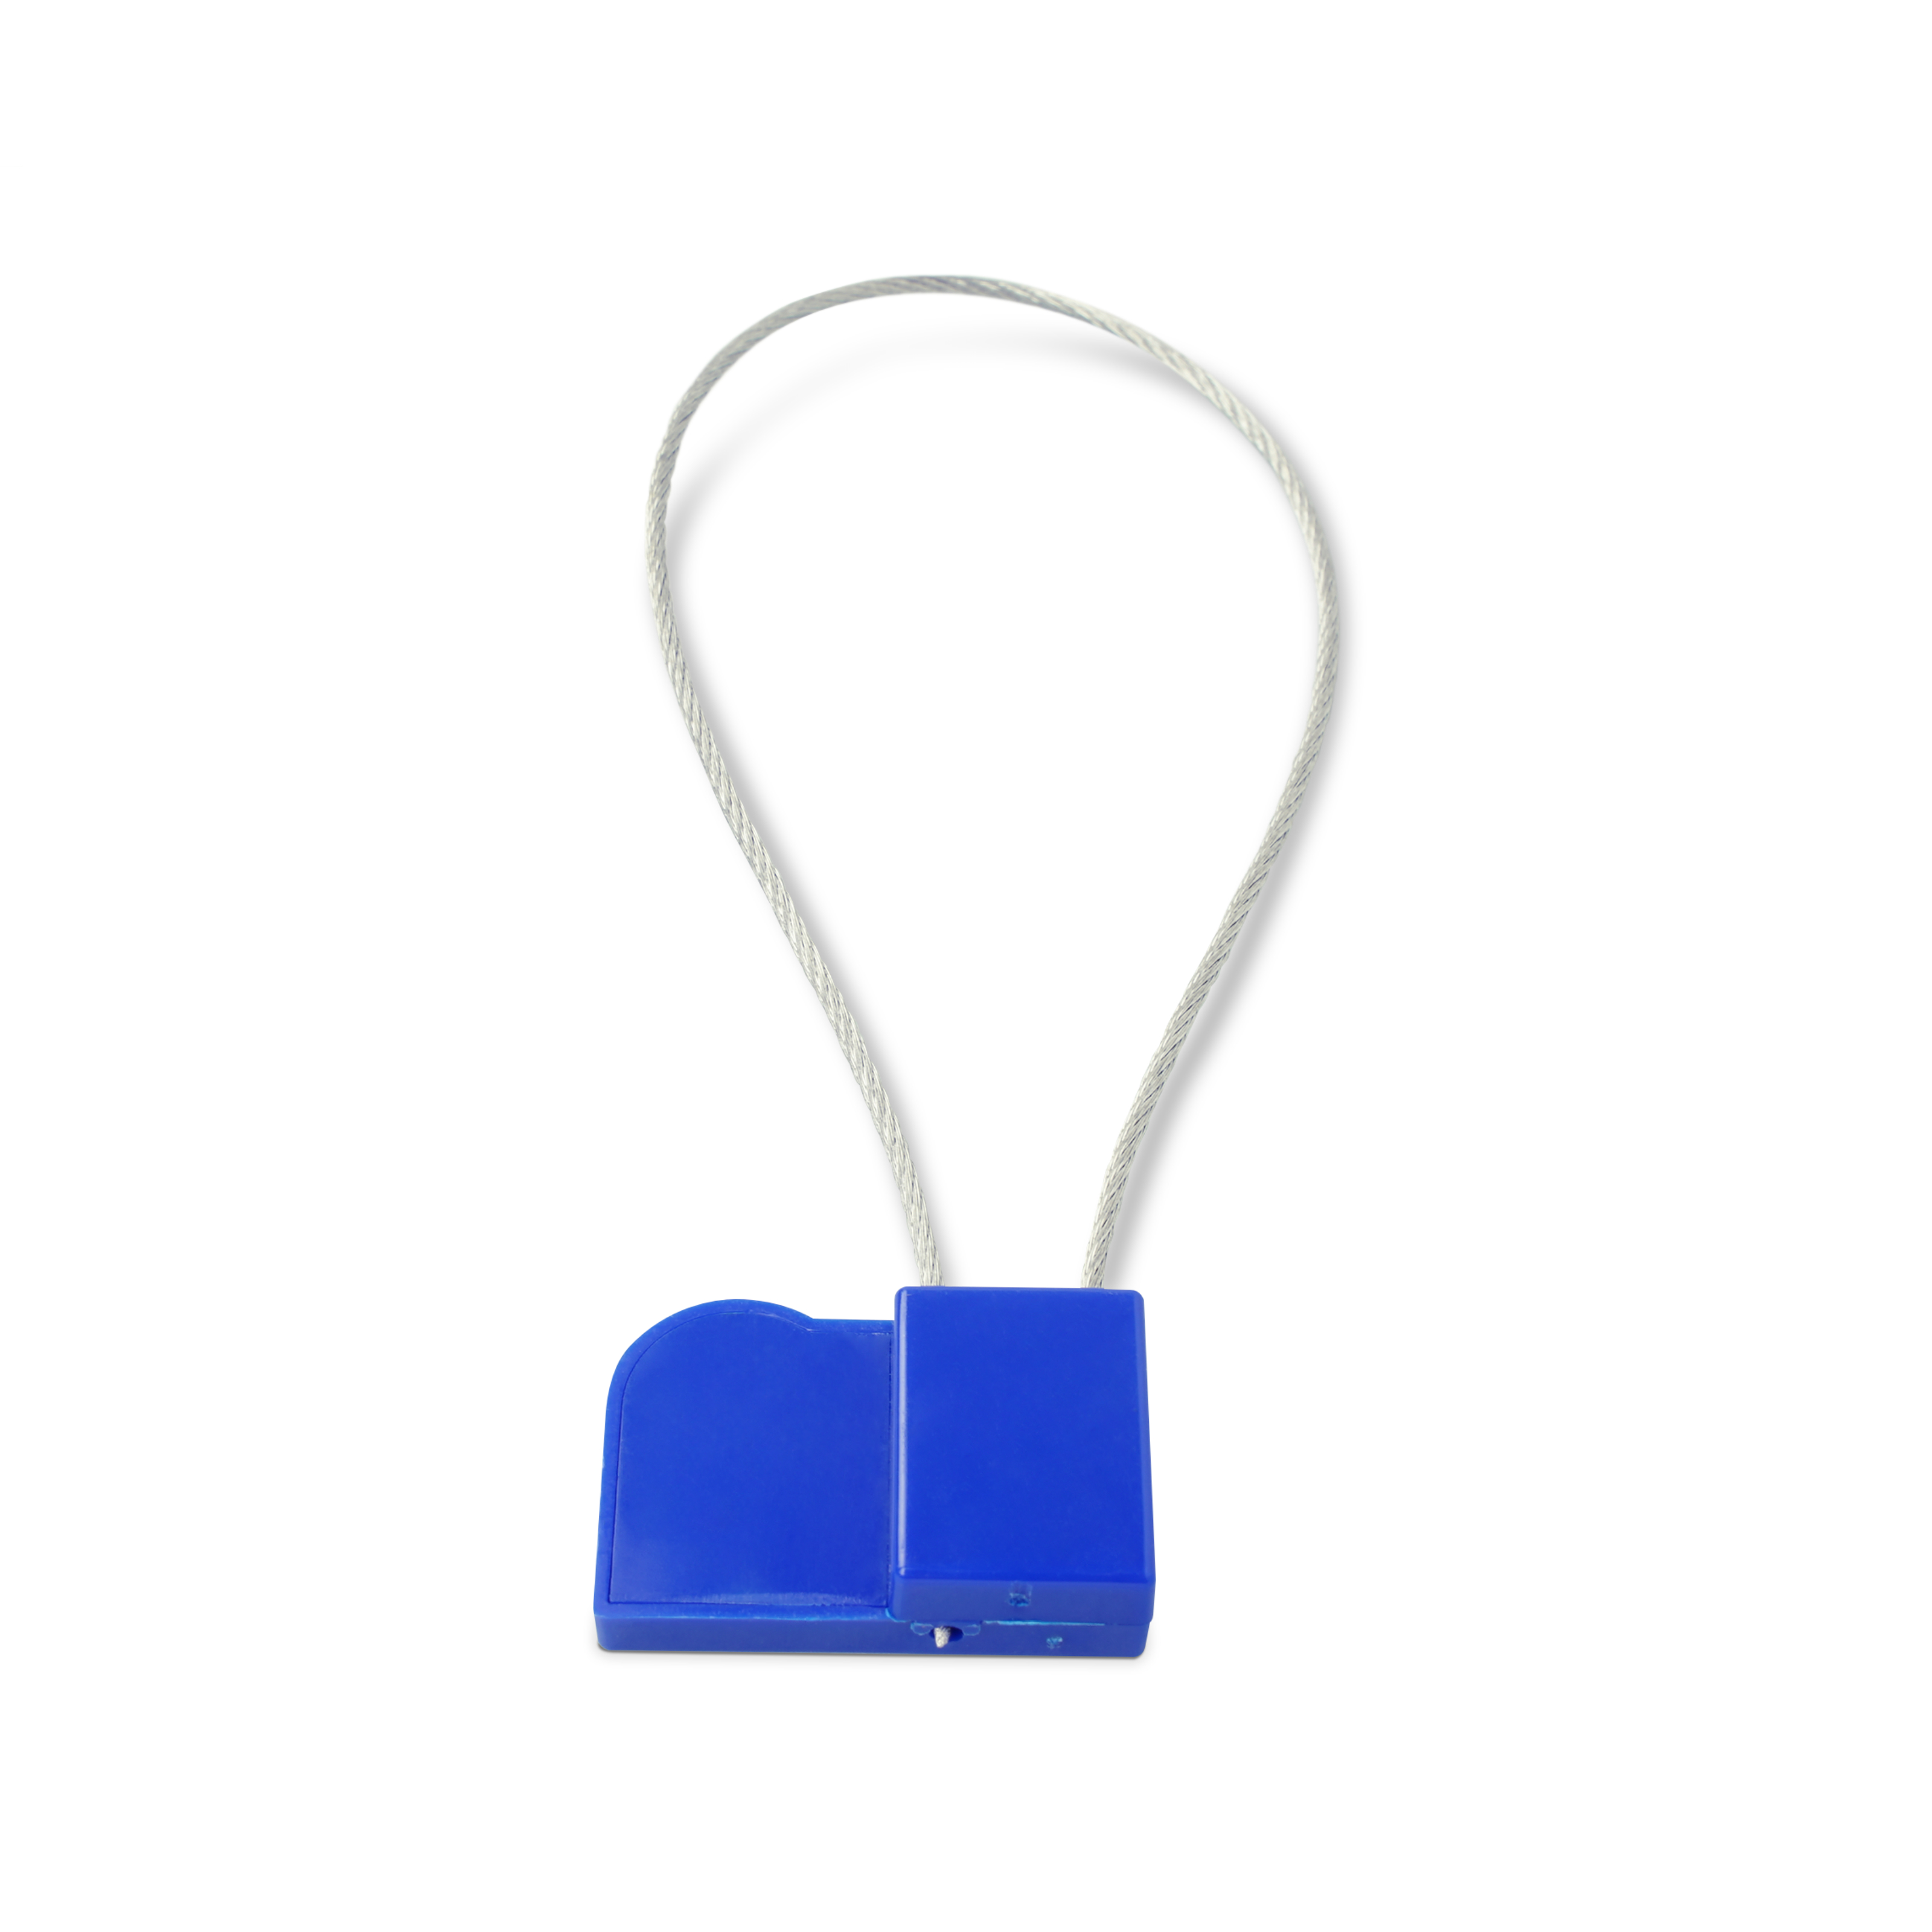 NFC cable tie ABS - steel strap - loop length 280 x 1.5 mm - NTAG213 - 180 byte - blue